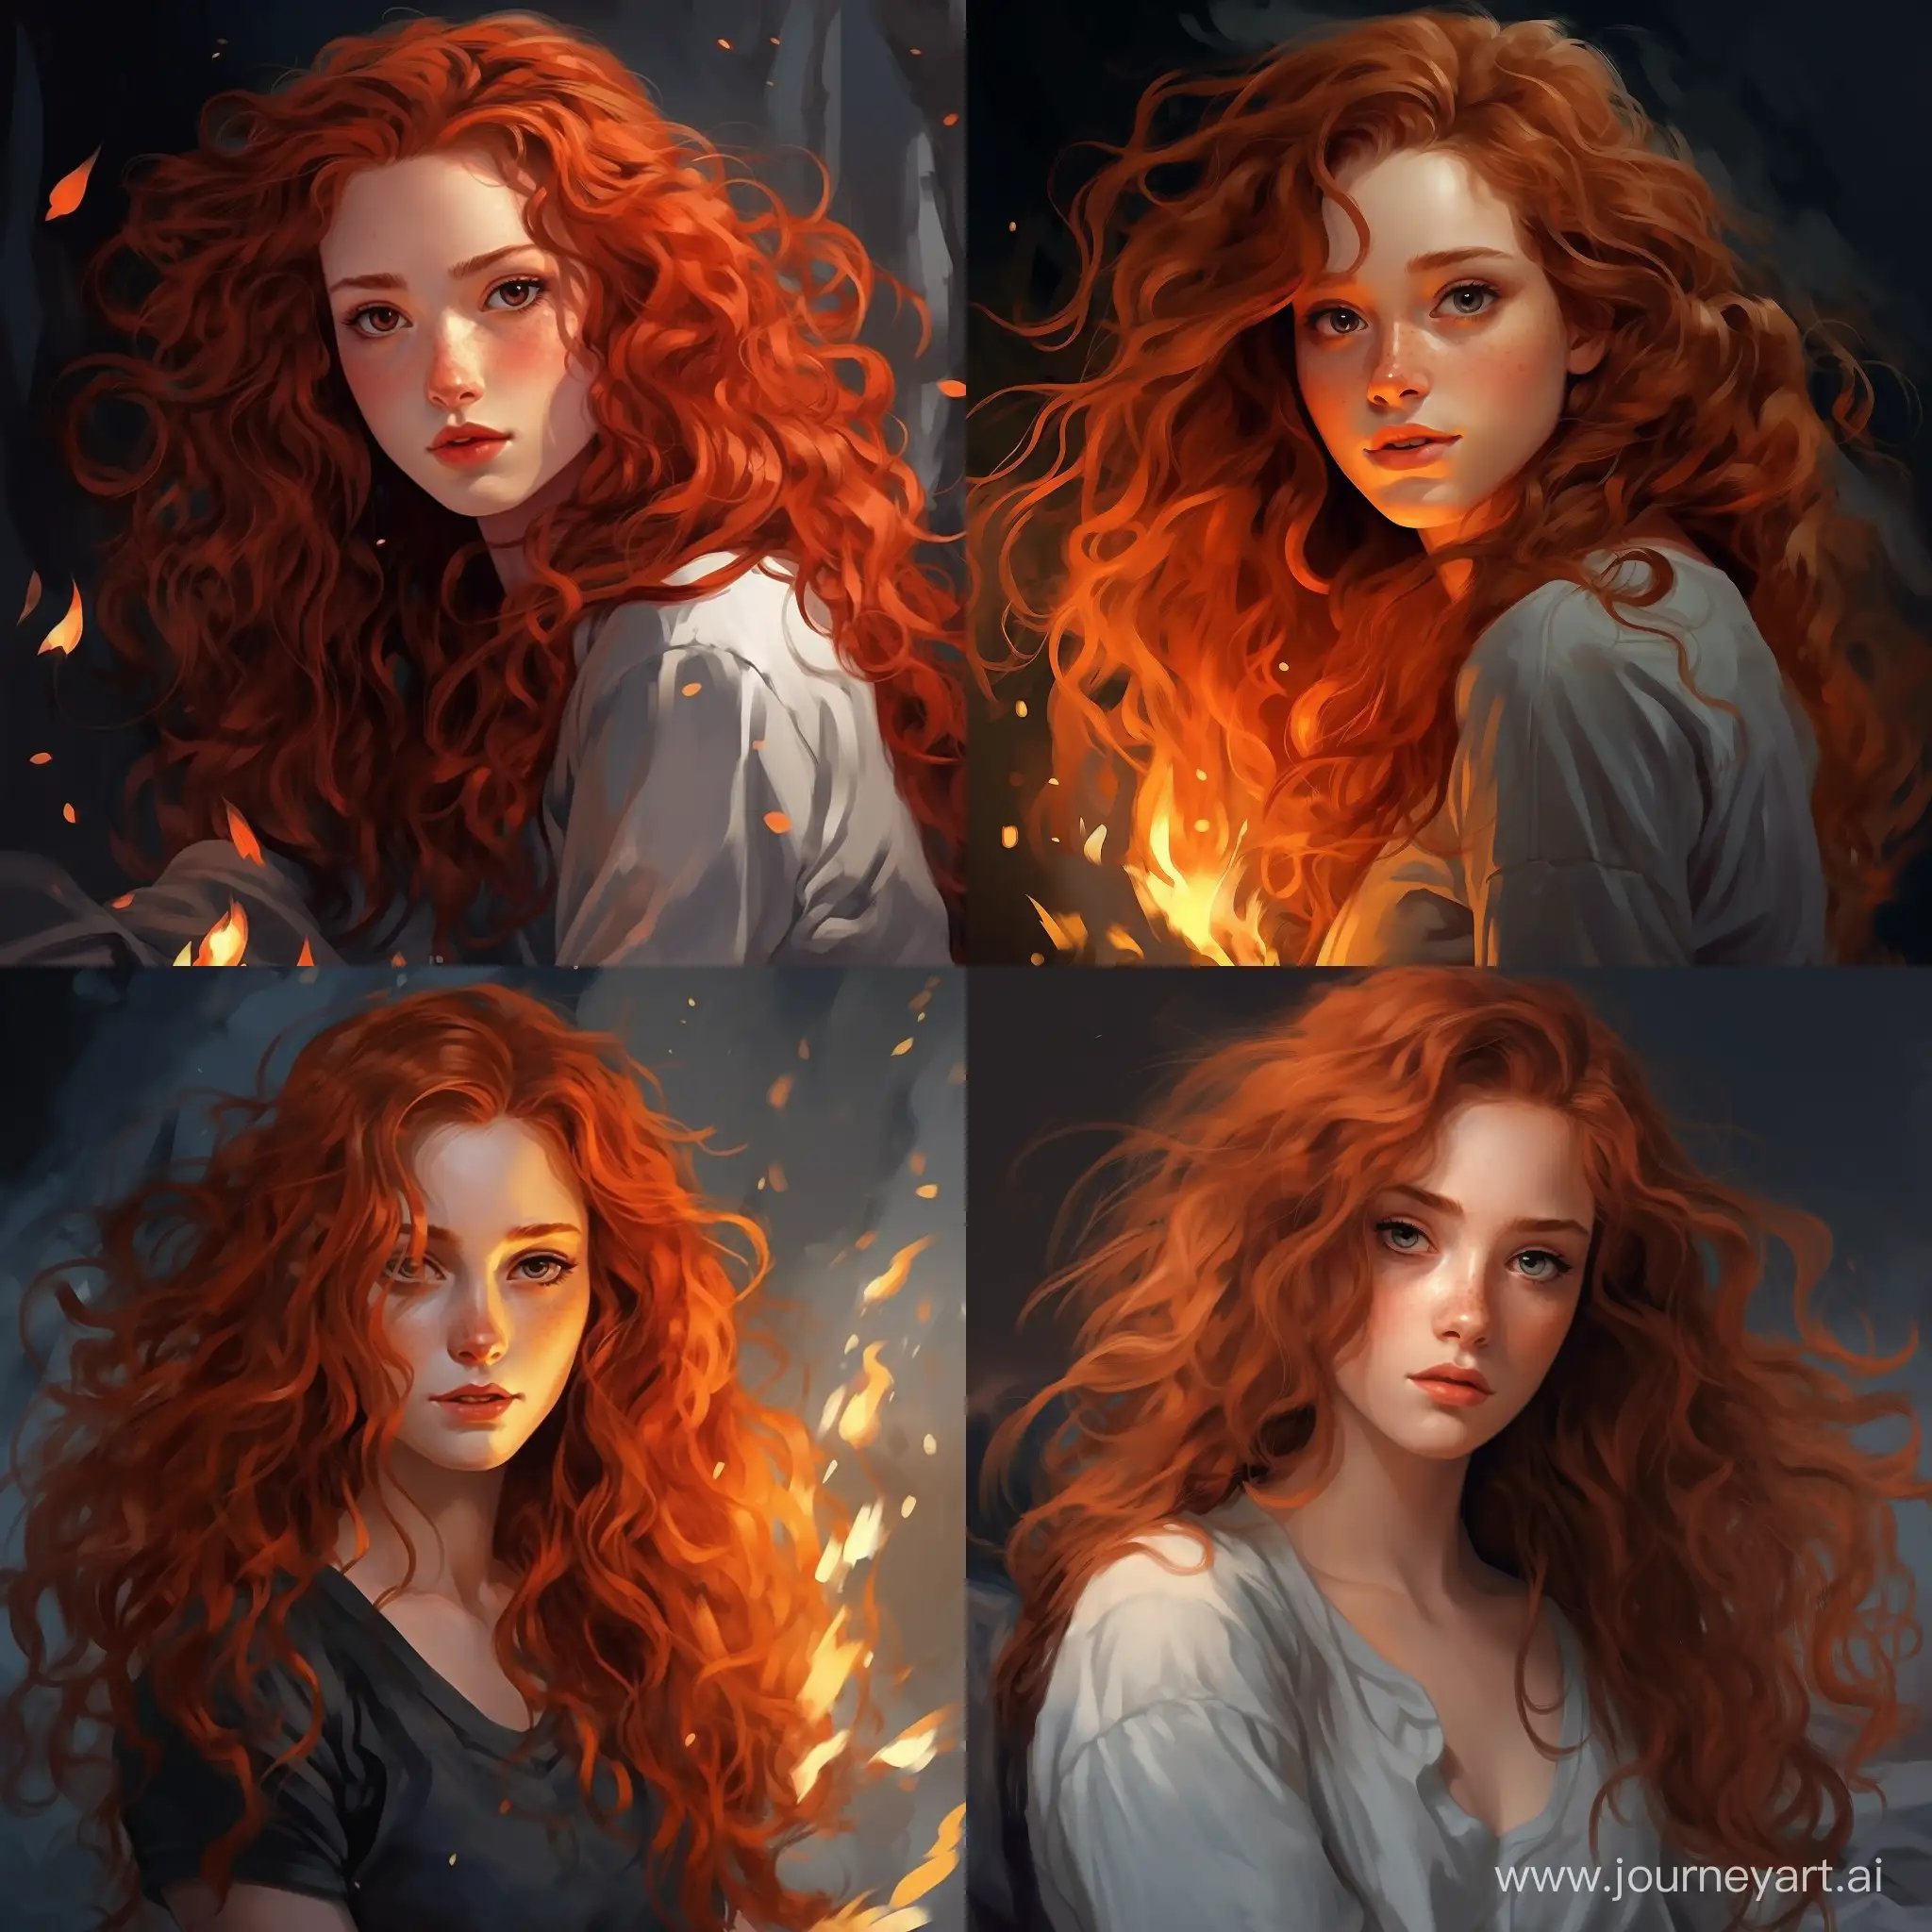 Adorable-15YearOld-with-Curly-Red-Hair-and-Gray-Eyes-in-a-Fiery-Cartoon-Art